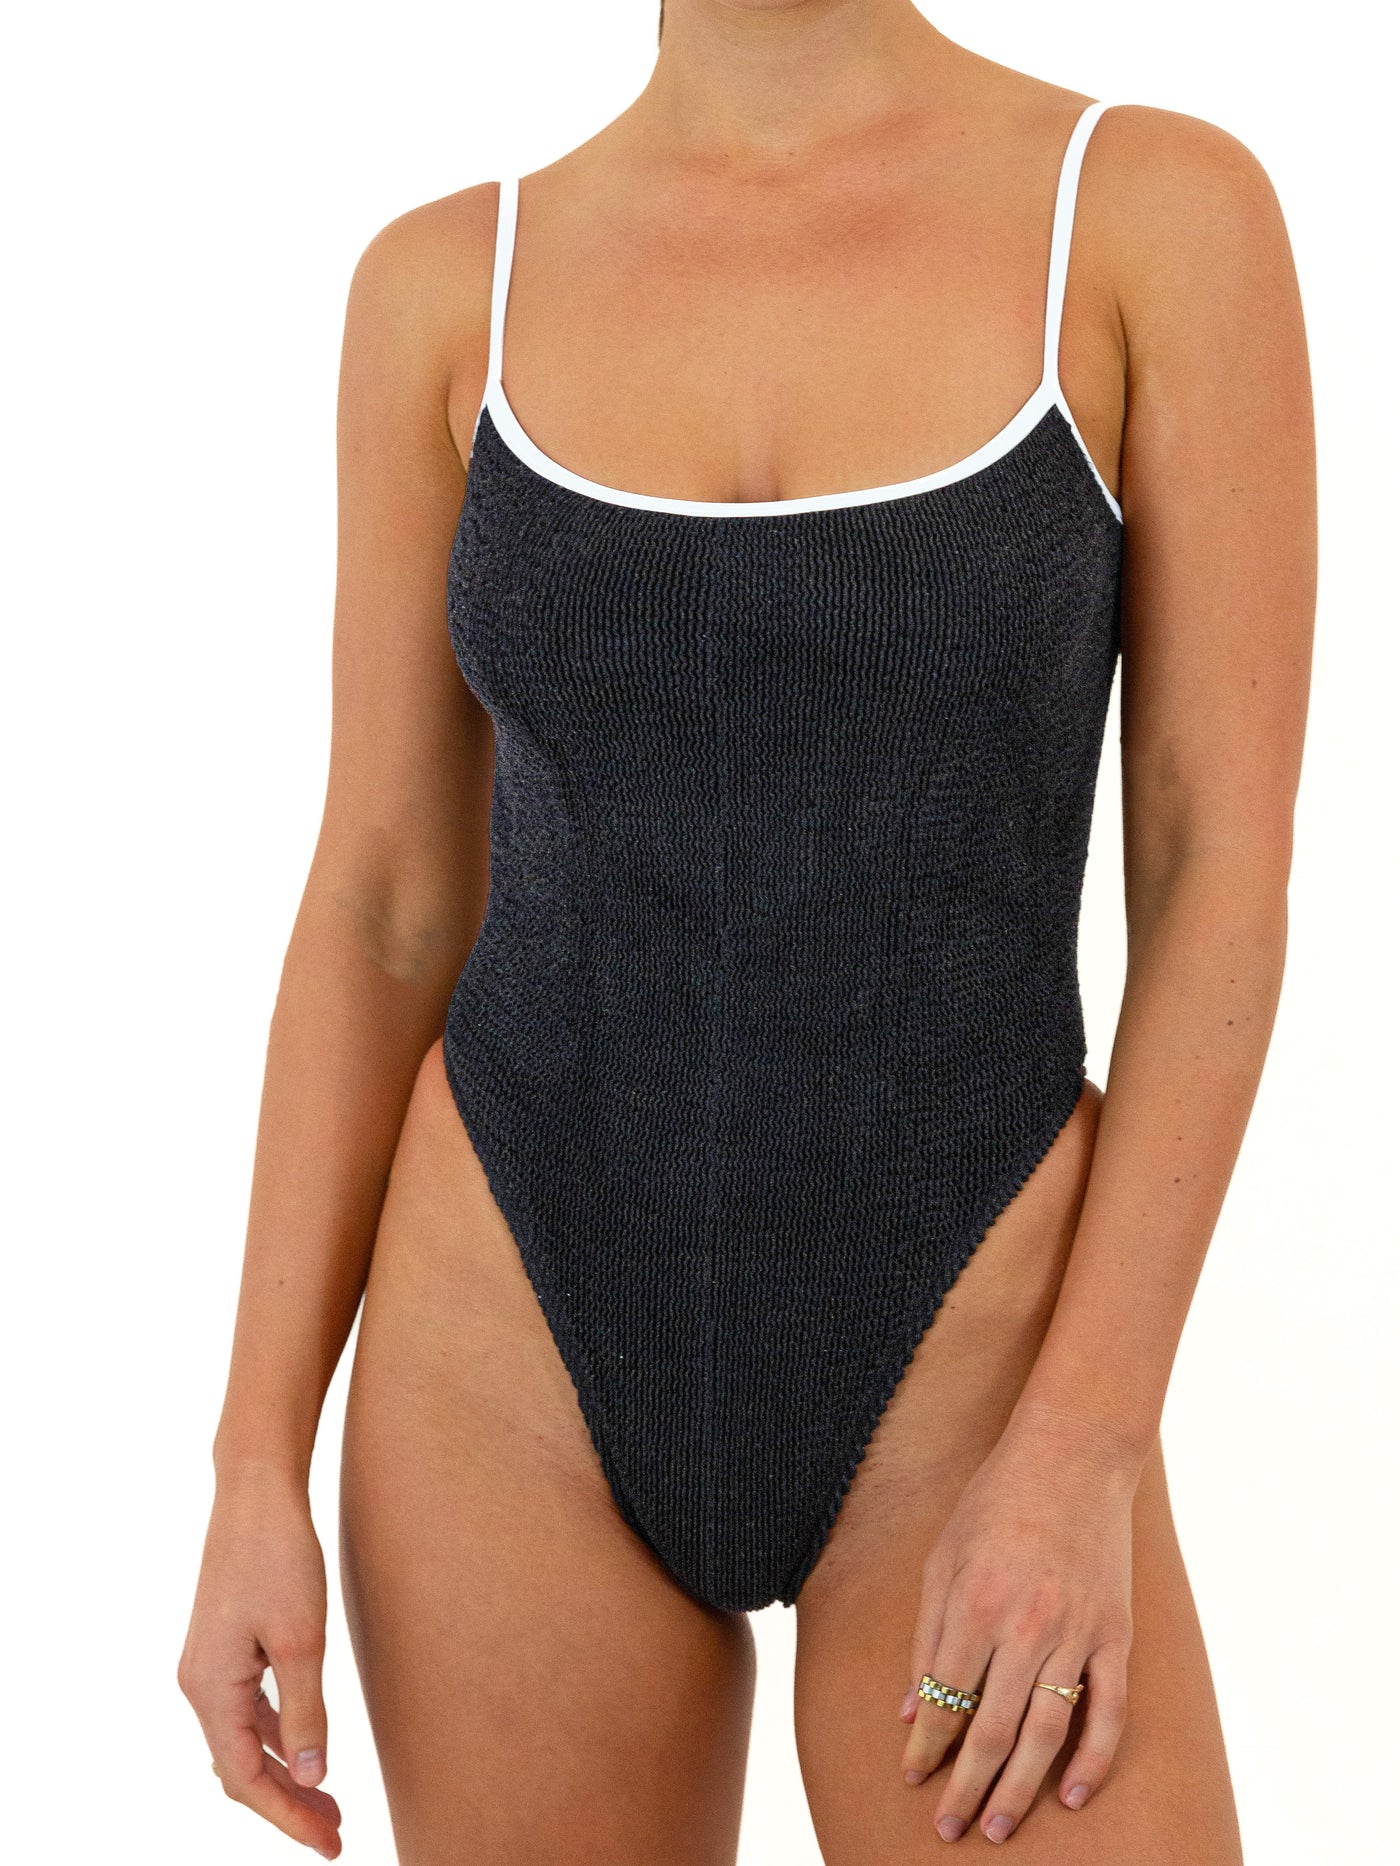 BALBOA THIN STRAP ONE PIECE - BLACK WITH WHITE CONTRAST